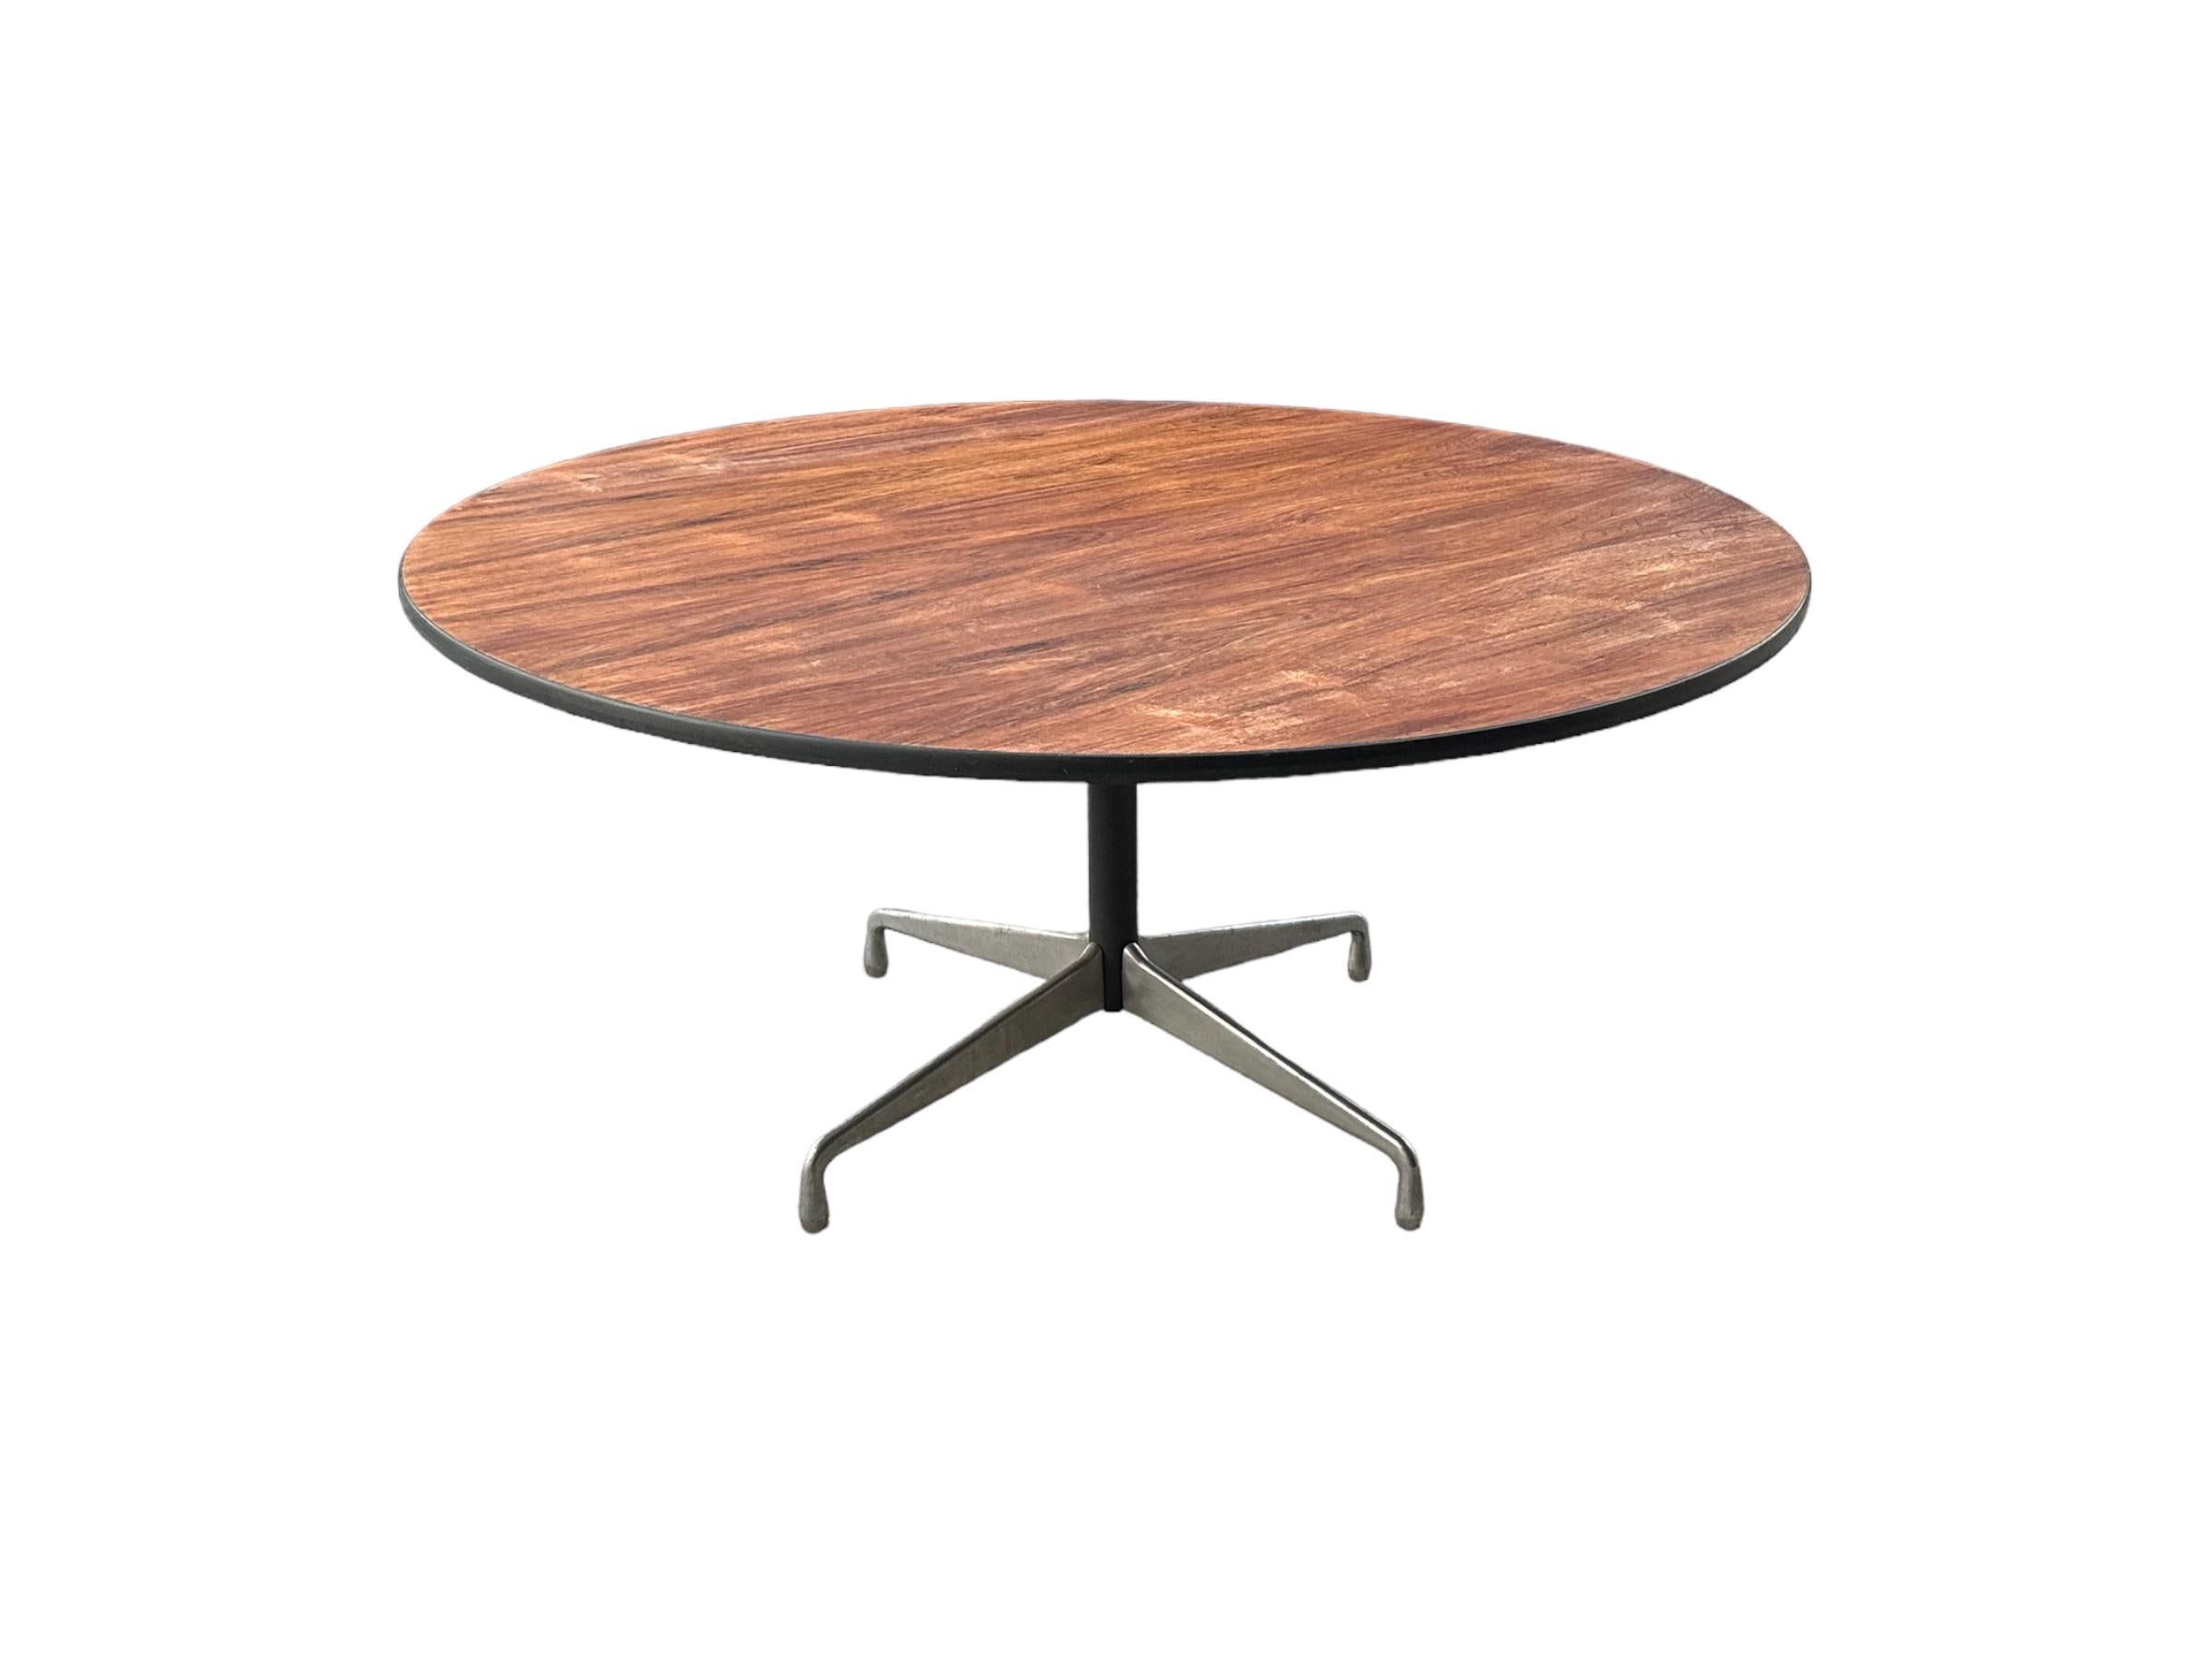 Rare Large Circular Brazilian Rosewood Herman Miller Eames Dining Table In Good Condition For Sale In Brooklyn, NY